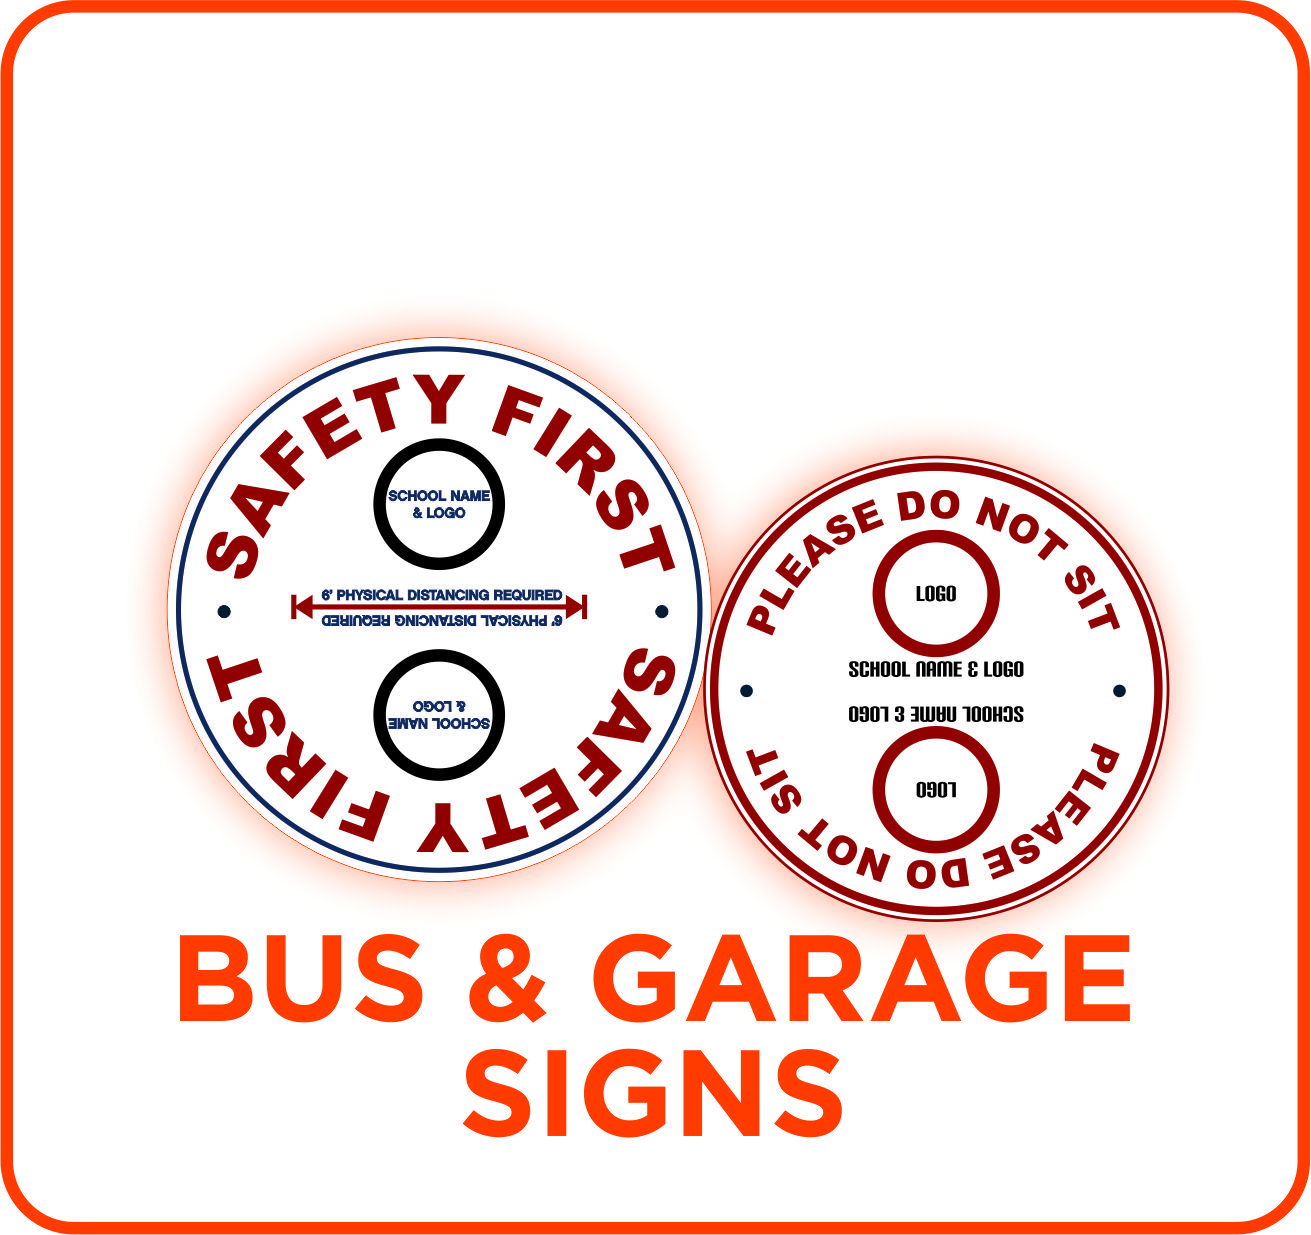 Educational Safety Bus & Garage Signs